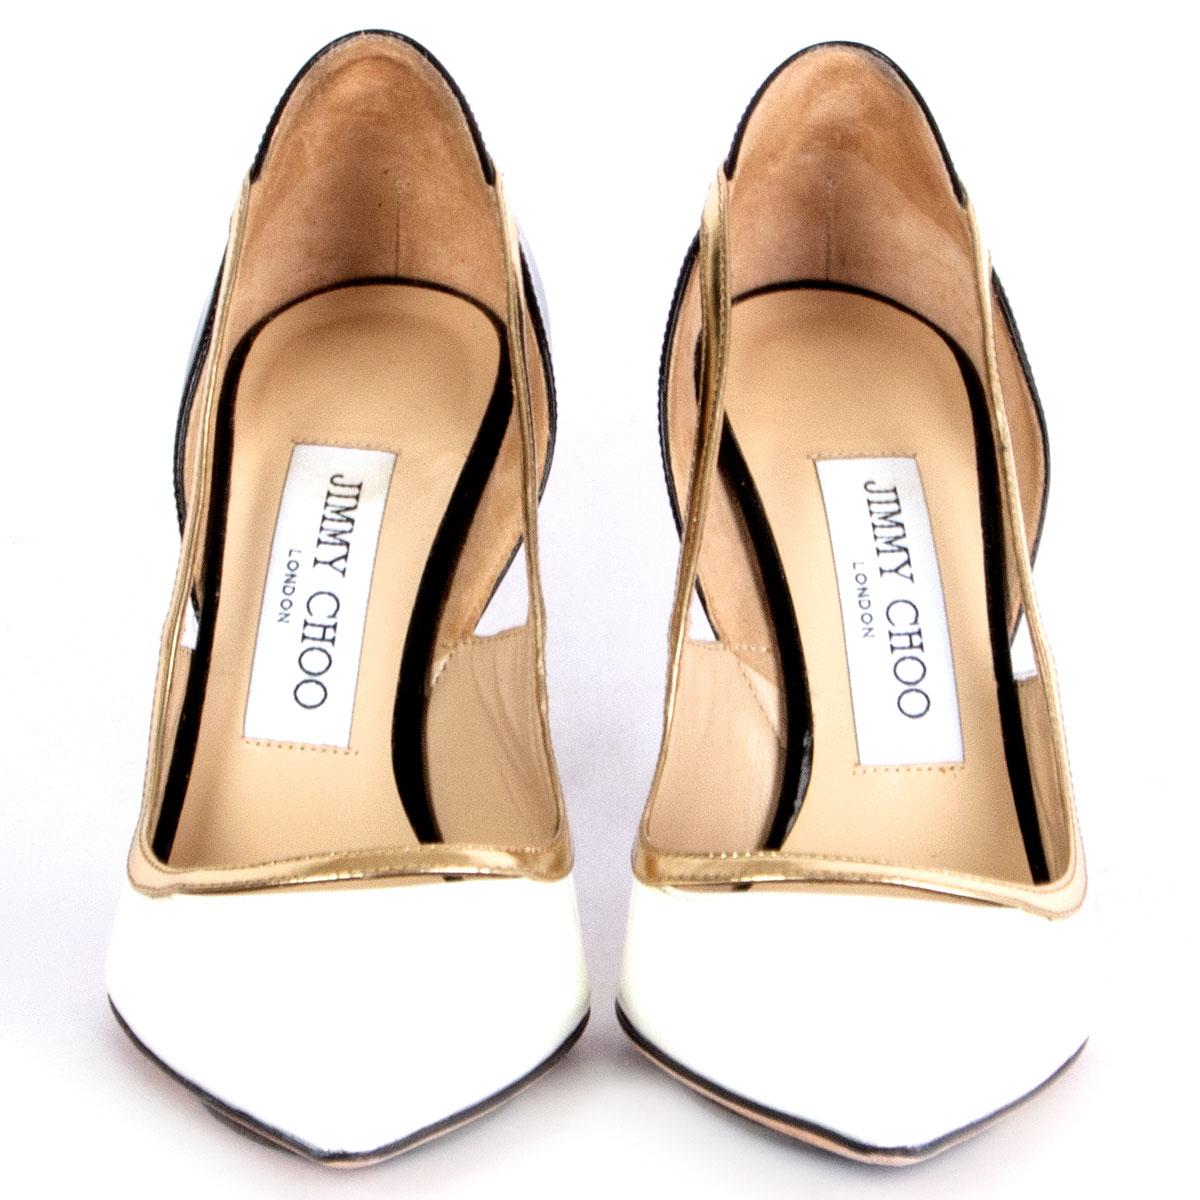 100% authentic Jimmy Choo Viper pointed-toe pumps in tricolor white, black and gold patent leather. Have been worn and are in excellent condition.

Imprinted Size 36
Inside Sole 23.5cm (9.2in)
Width 7cm (2.7in)
Heel 9.5cm (3.7in)